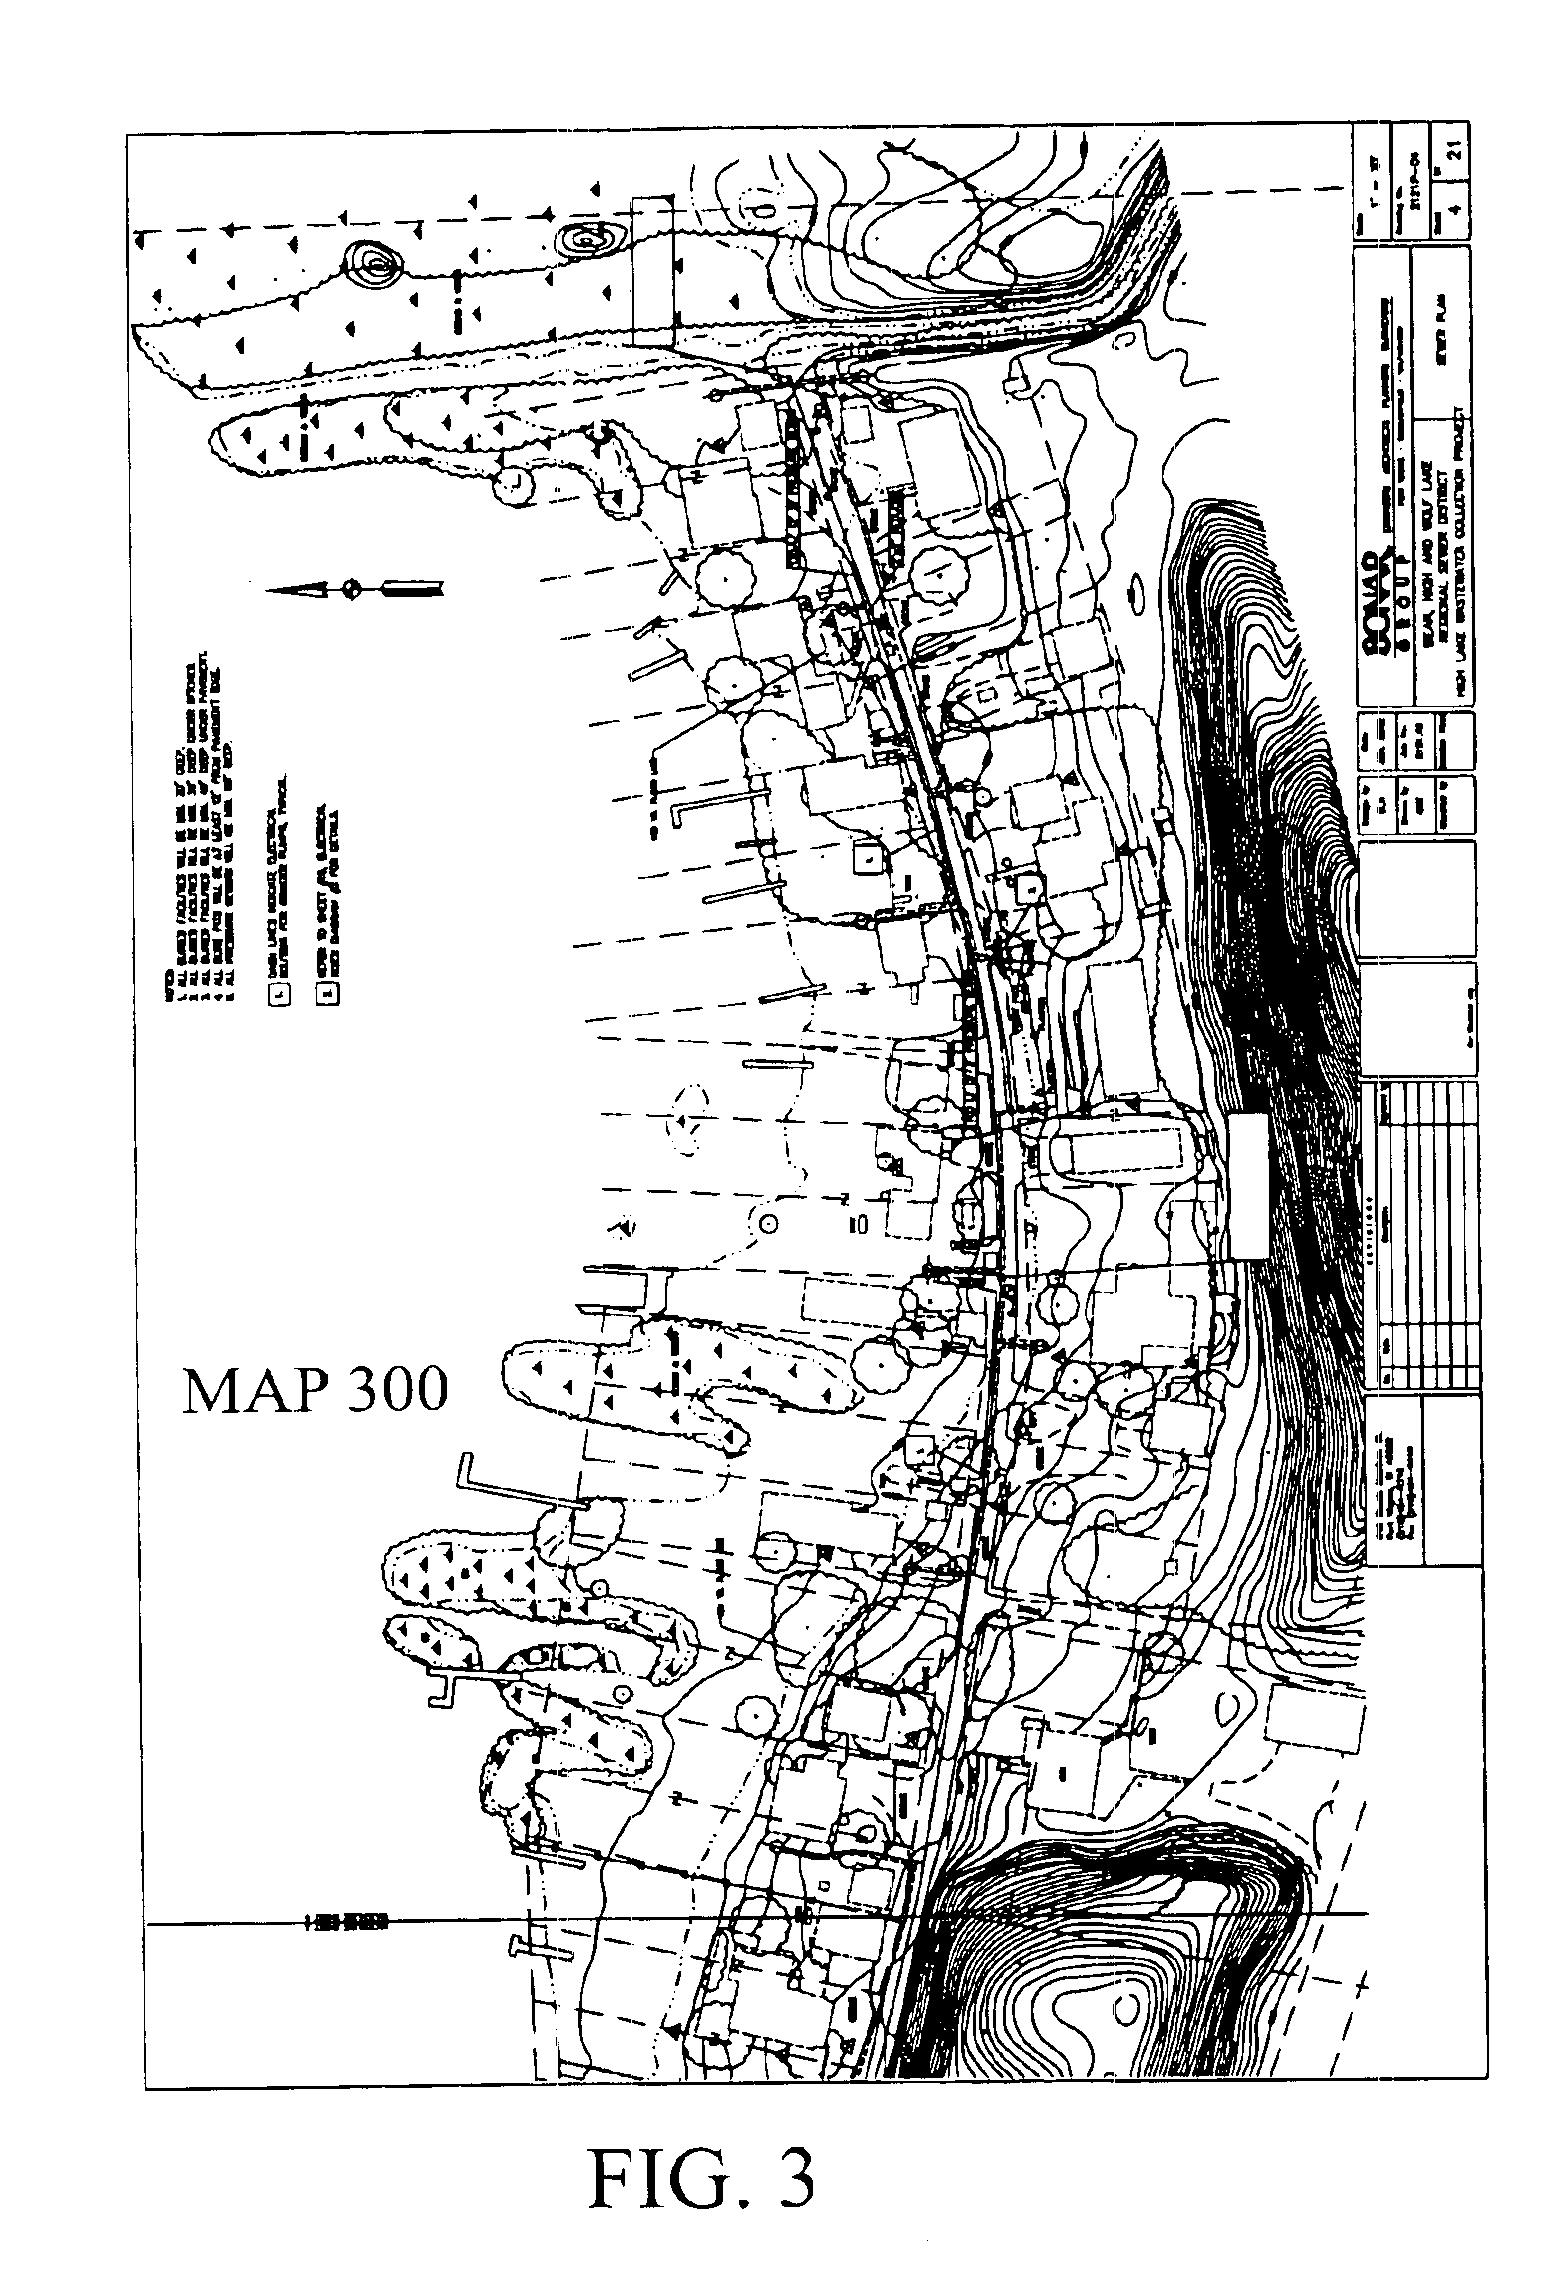 Municipal utility mapping system and method